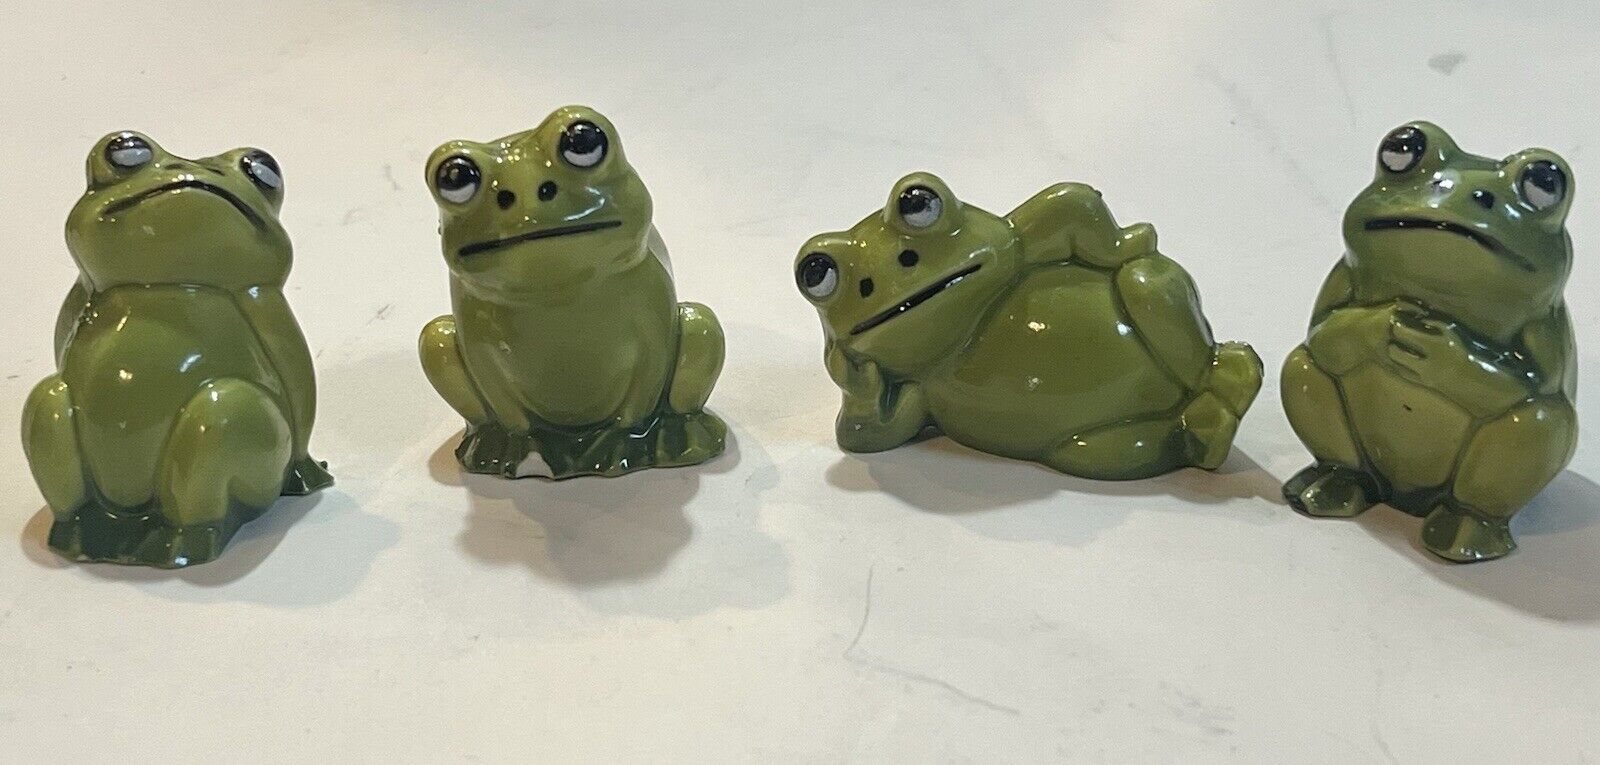 Vintage Miniature Big Eyed Frog Figurines Plastic (4) Made in Hong Kong SEE PICS